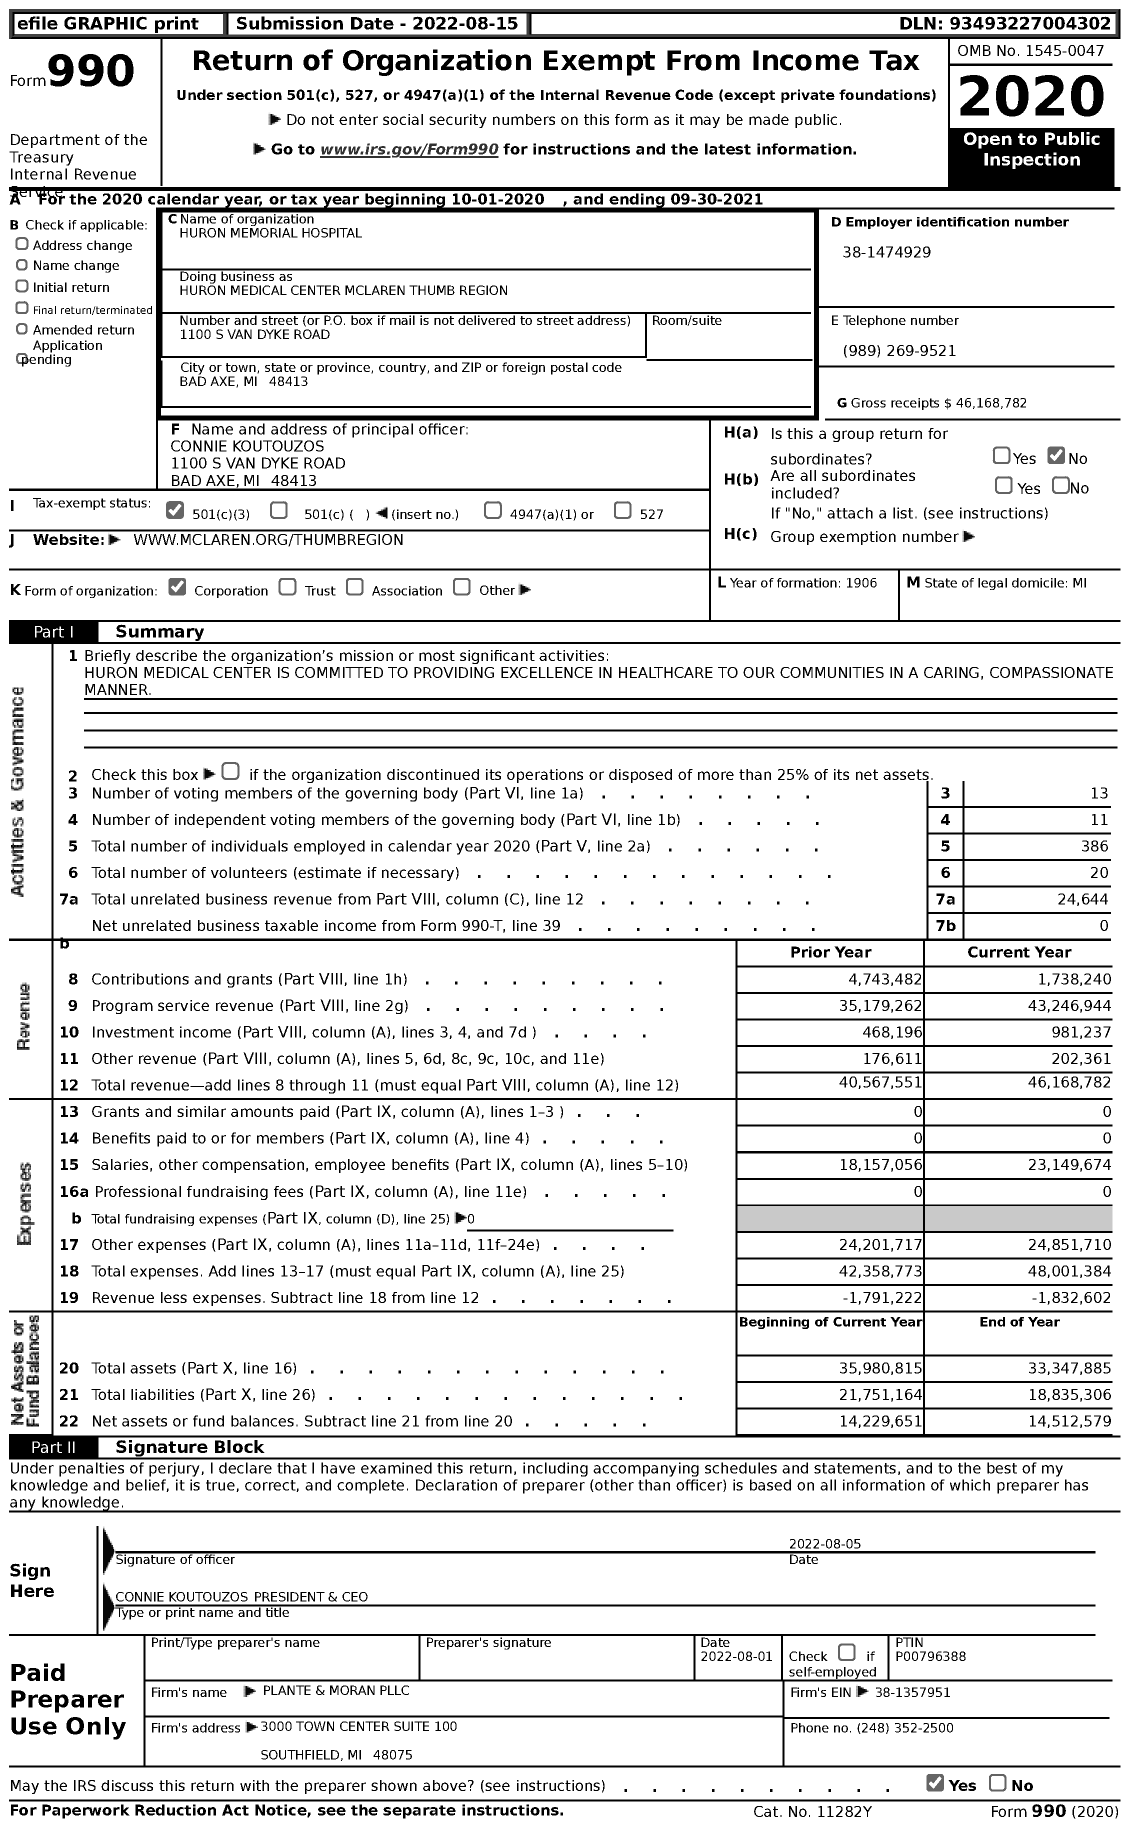 Image of first page of 2020 Form 990 for Huron Medical Center Mclaren Thumb Region